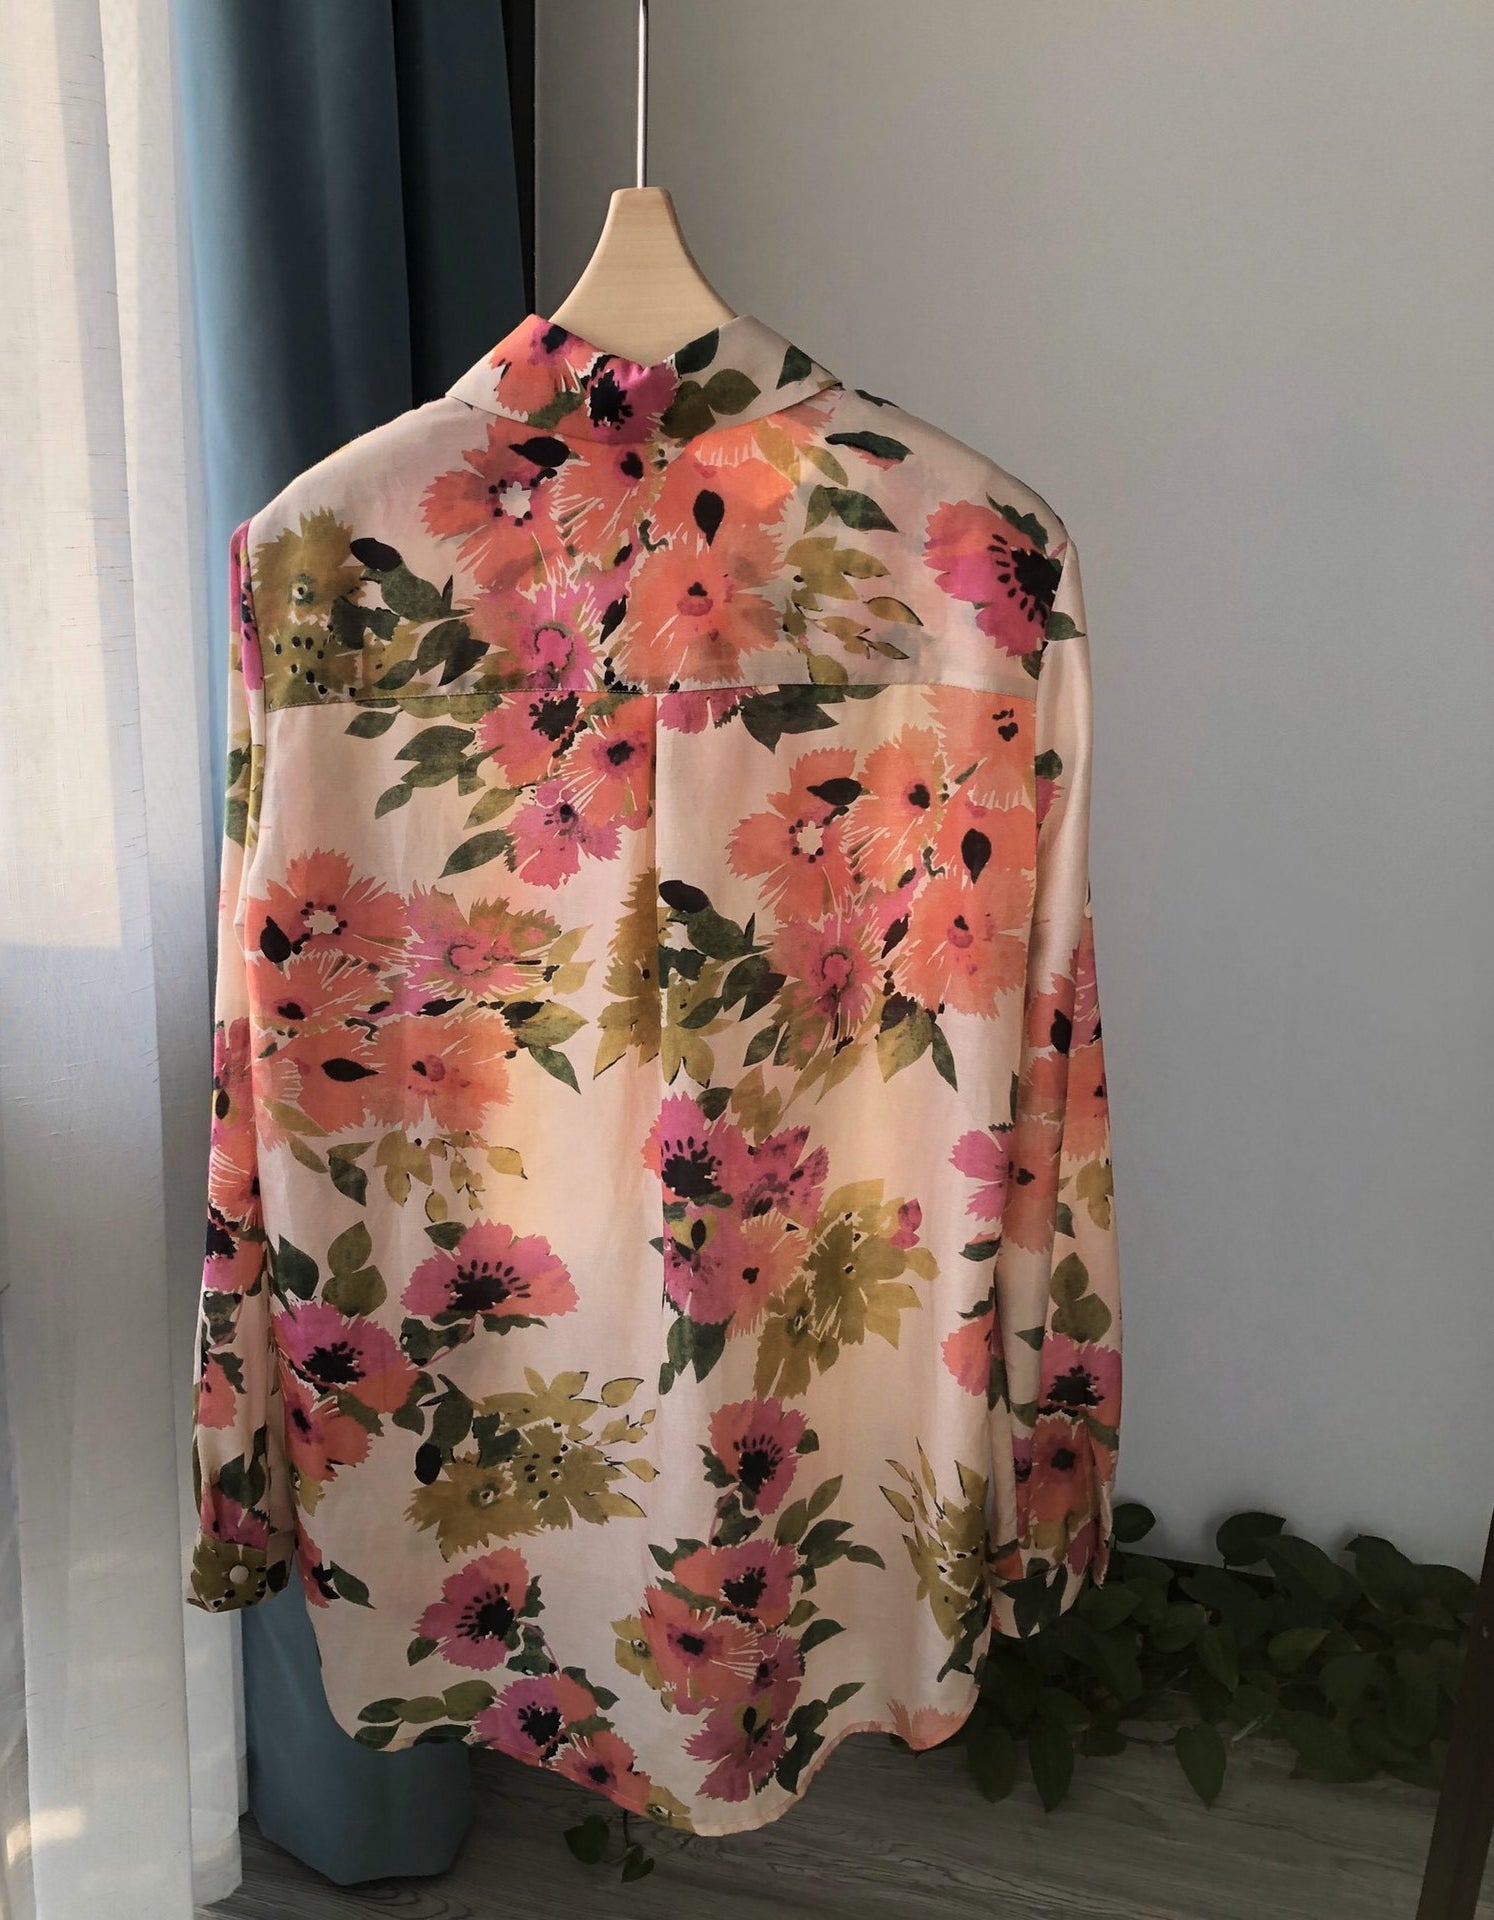 Nonothing| Women's silk & Cotton blend shirt in floral print